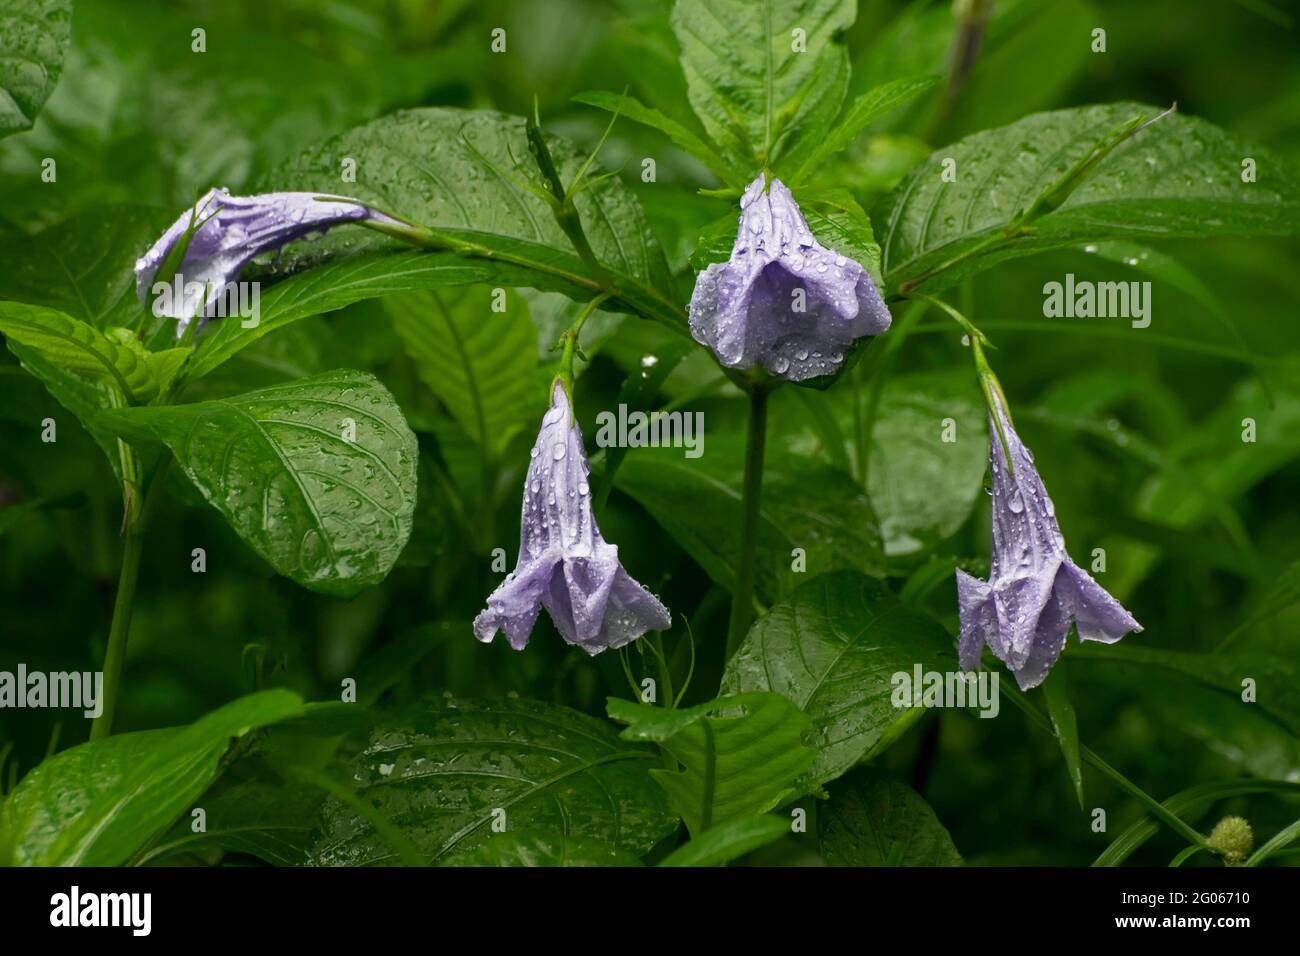 Datura Hybrid, Devil-s Trumpet, Horn of Plenty, Downy Thorn Apple - Black Currant Swirl flower with raindrops on them. Monsoon image of natural beauty Stock Photo